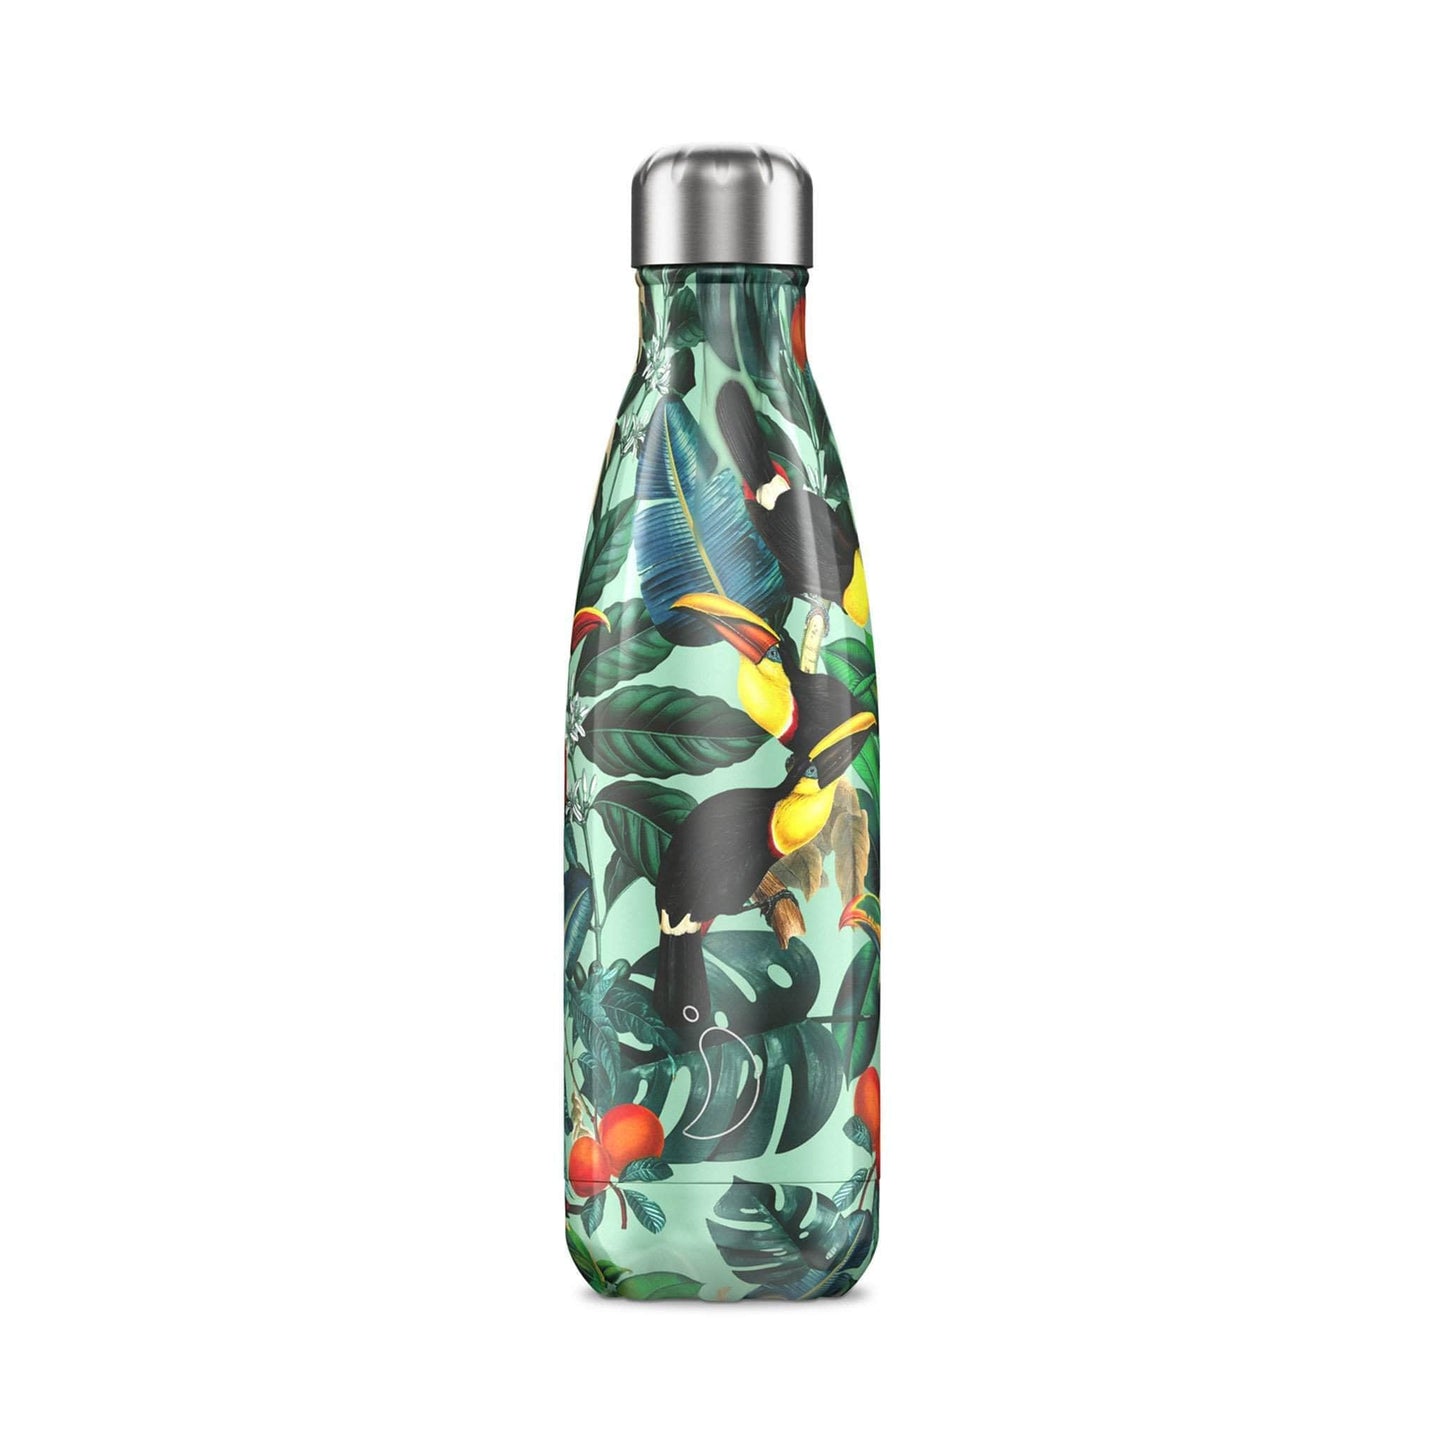 Chilly's Water Bottles Chilly's Reusable Bottle - 500ml, S/Steel,  Tropical Toucan